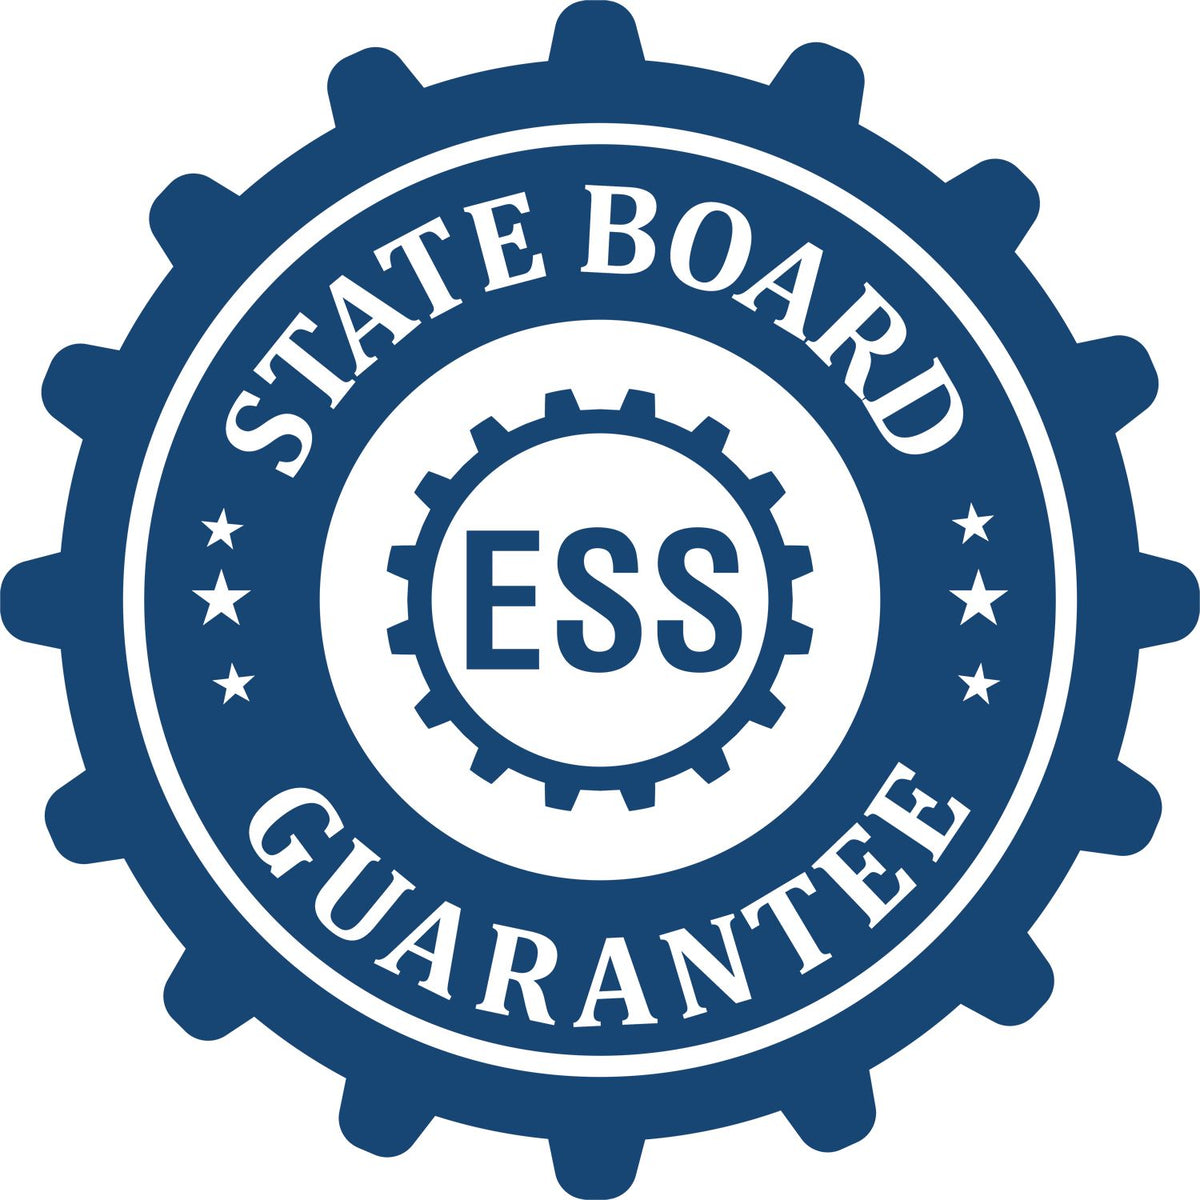 An emblem in a gear shape illustrating a state board guarantee for the Digital Arkansas PE Stamp and Electronic Seal for Arkansas Engineer product.